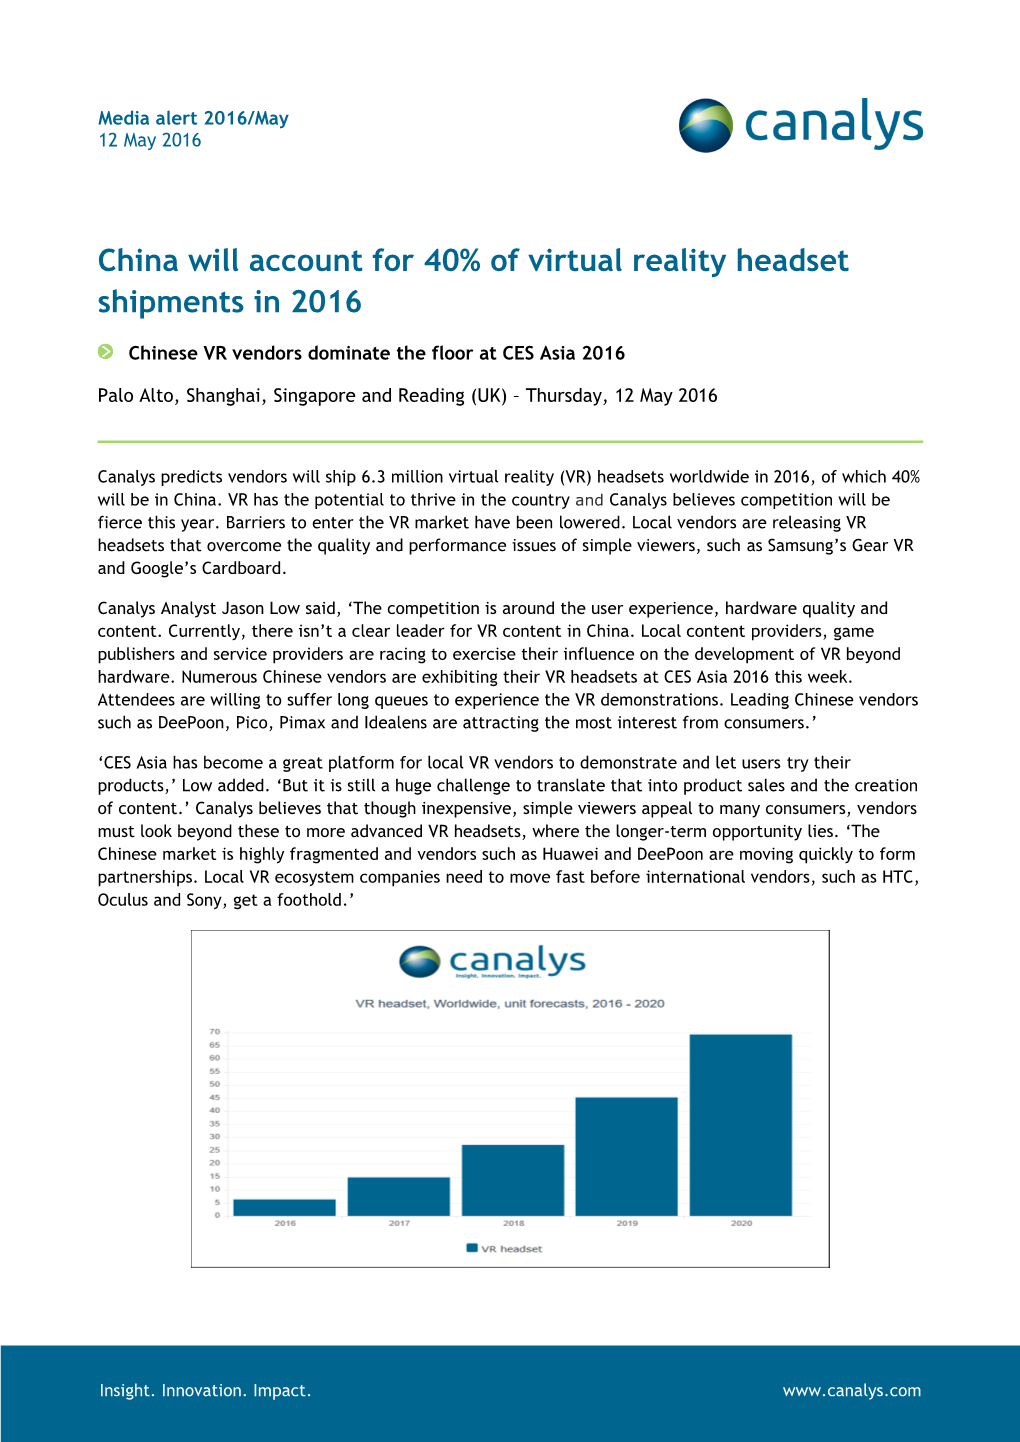 China Will Account for 40% of Virtual Reality Headset Shipments in 2016